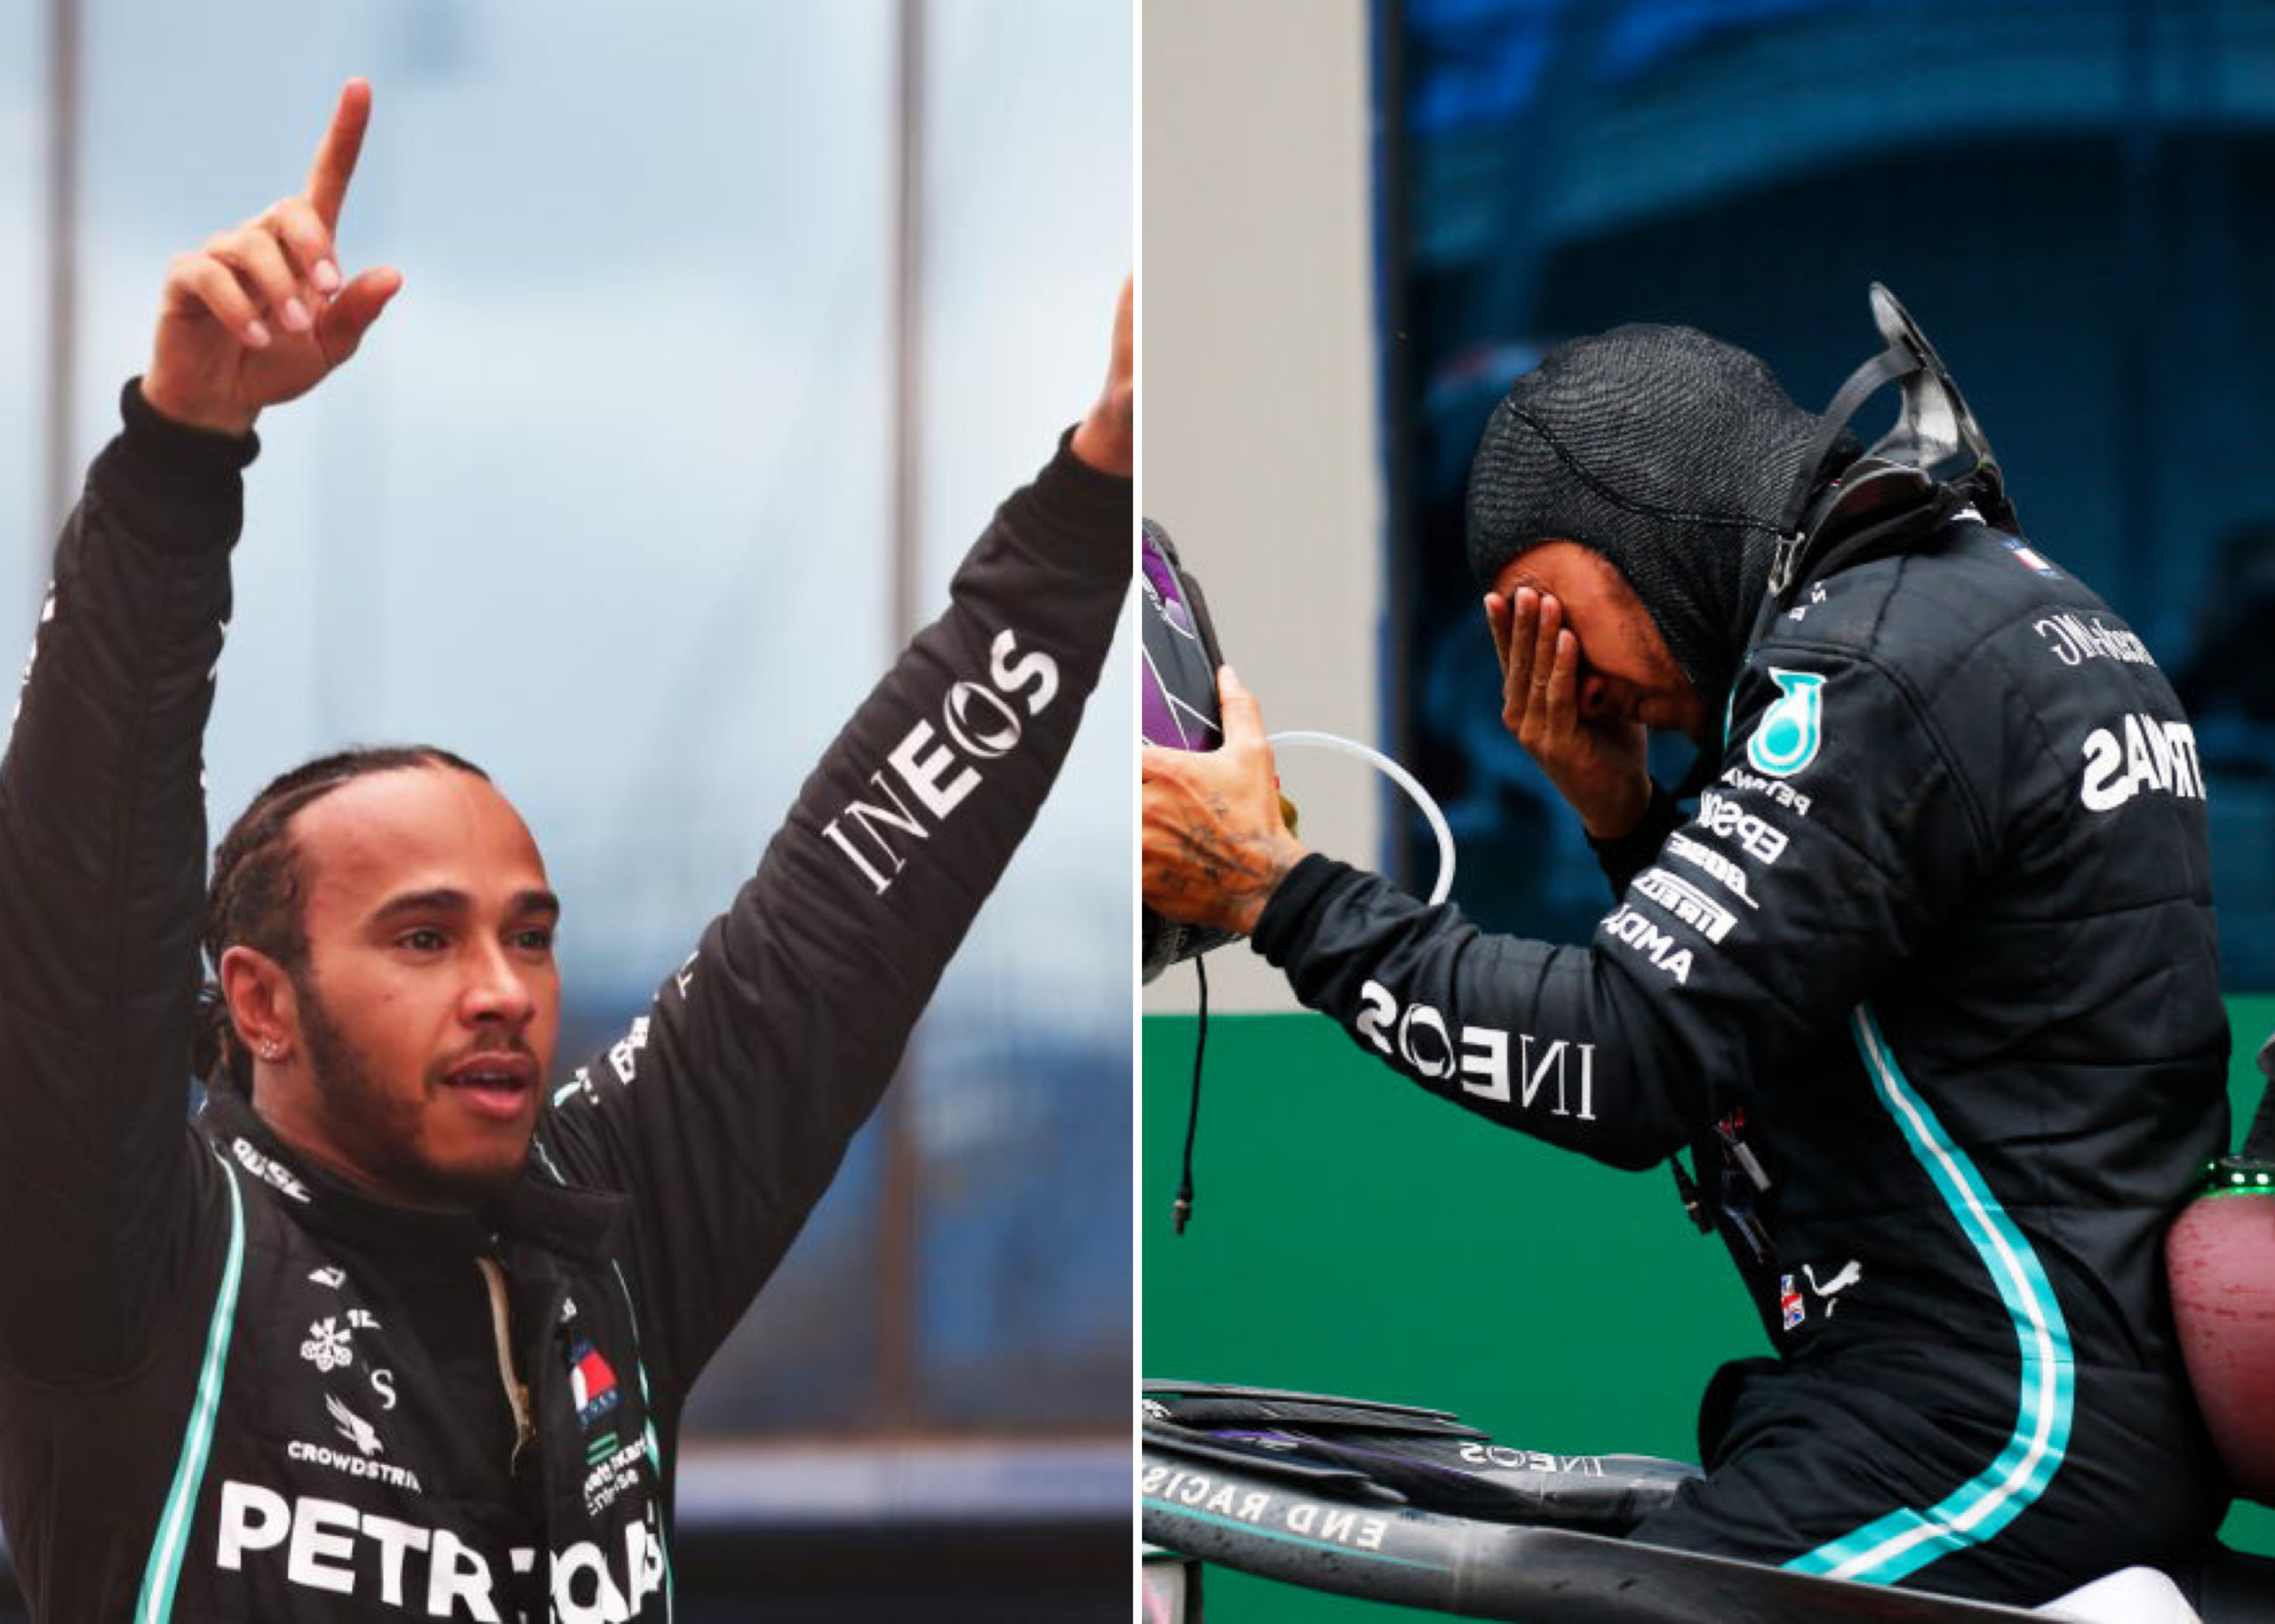 British Formula 1 driver, Lewis Hamilton has equalled Michael Schumacher's record after winning his seventh world title.